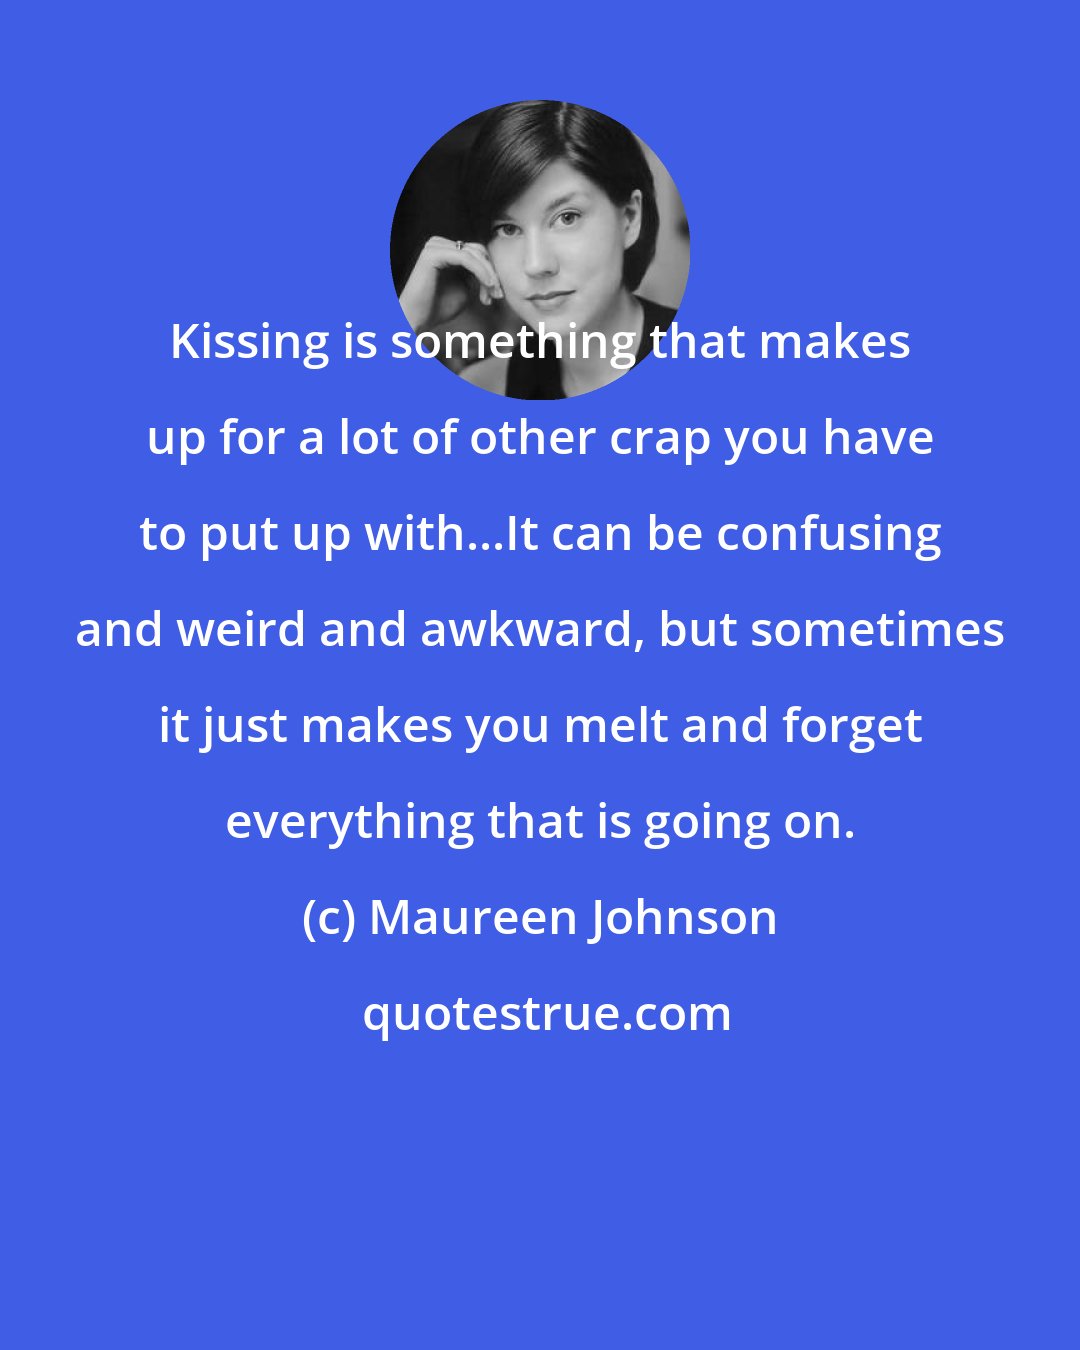 Maureen Johnson: Kissing is something that makes up for a lot of other crap you have to put up with...It can be confusing and weird and awkward, but sometimes it just makes you melt and forget everything that is going on.